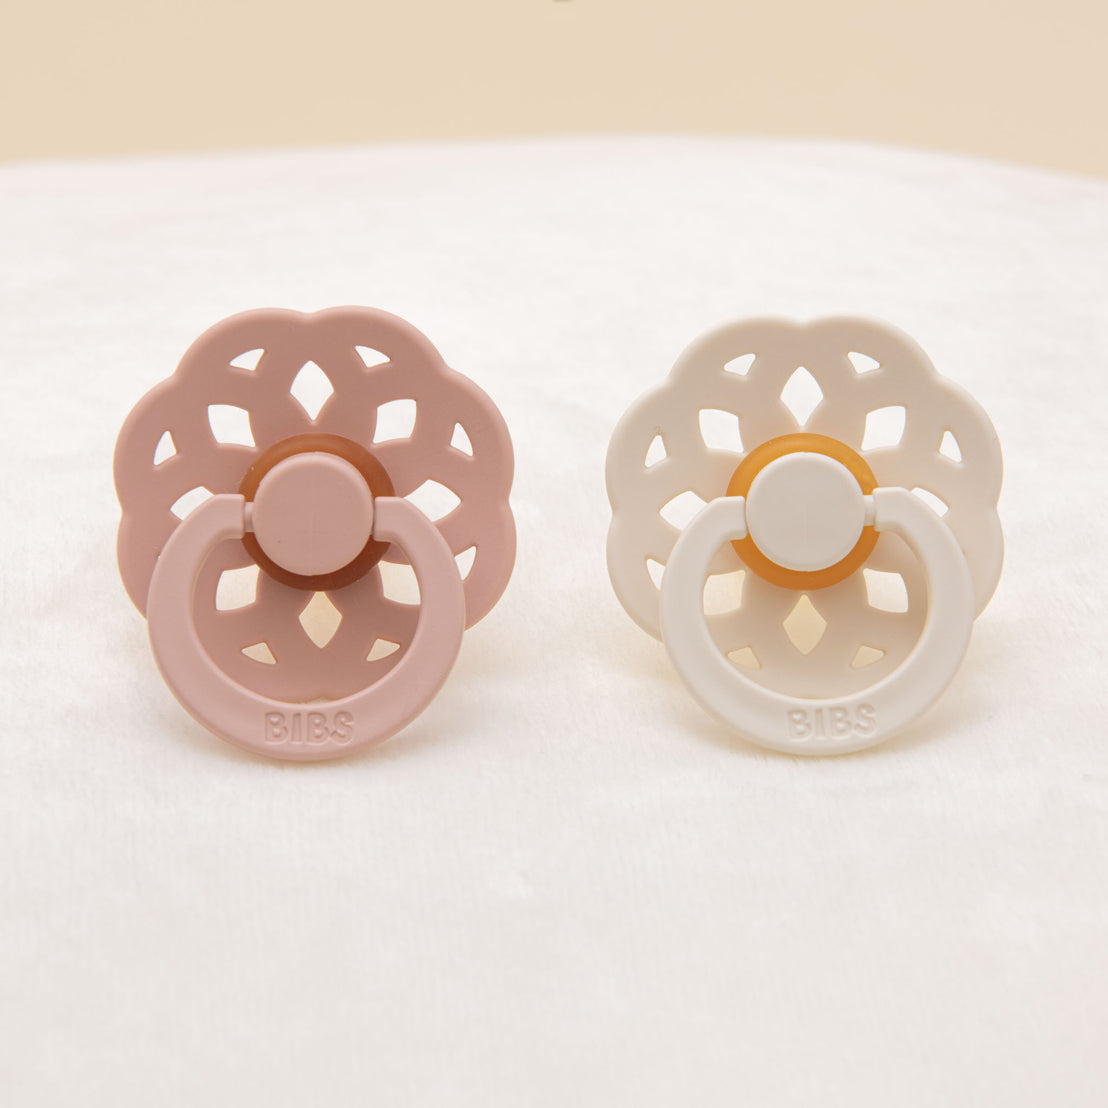 Two Isabella Pacifiers, one in Ivory & the other in Blush, are placed side by side on a soft beige fabric.